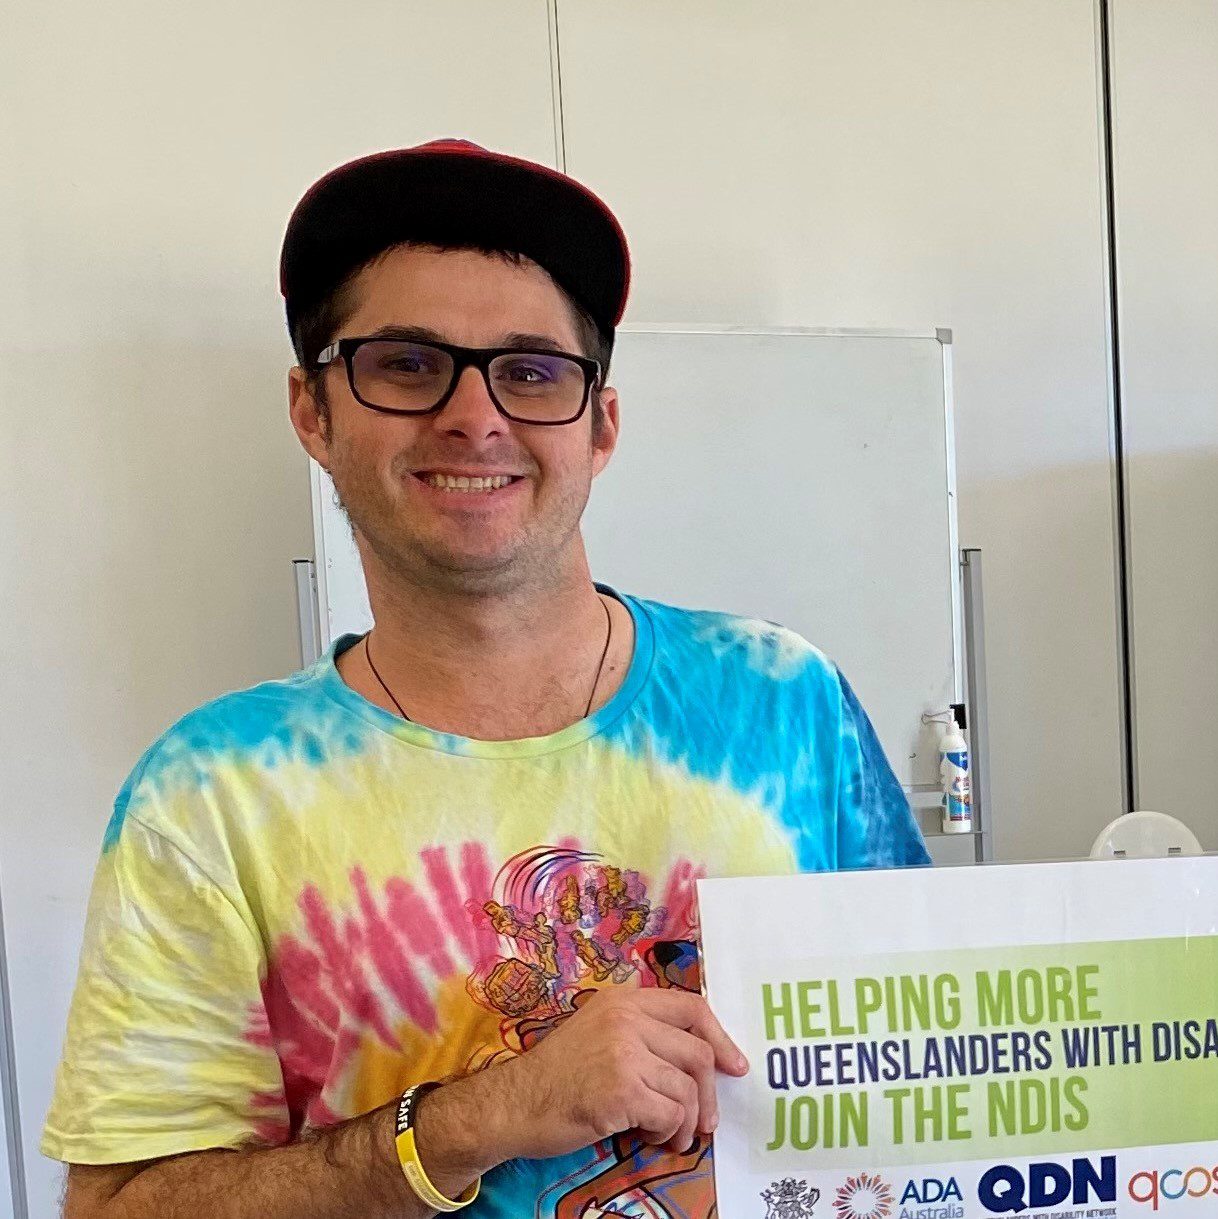 A man wearing a cap and glasses and a tie dyed bright shirt smiling at the camera.